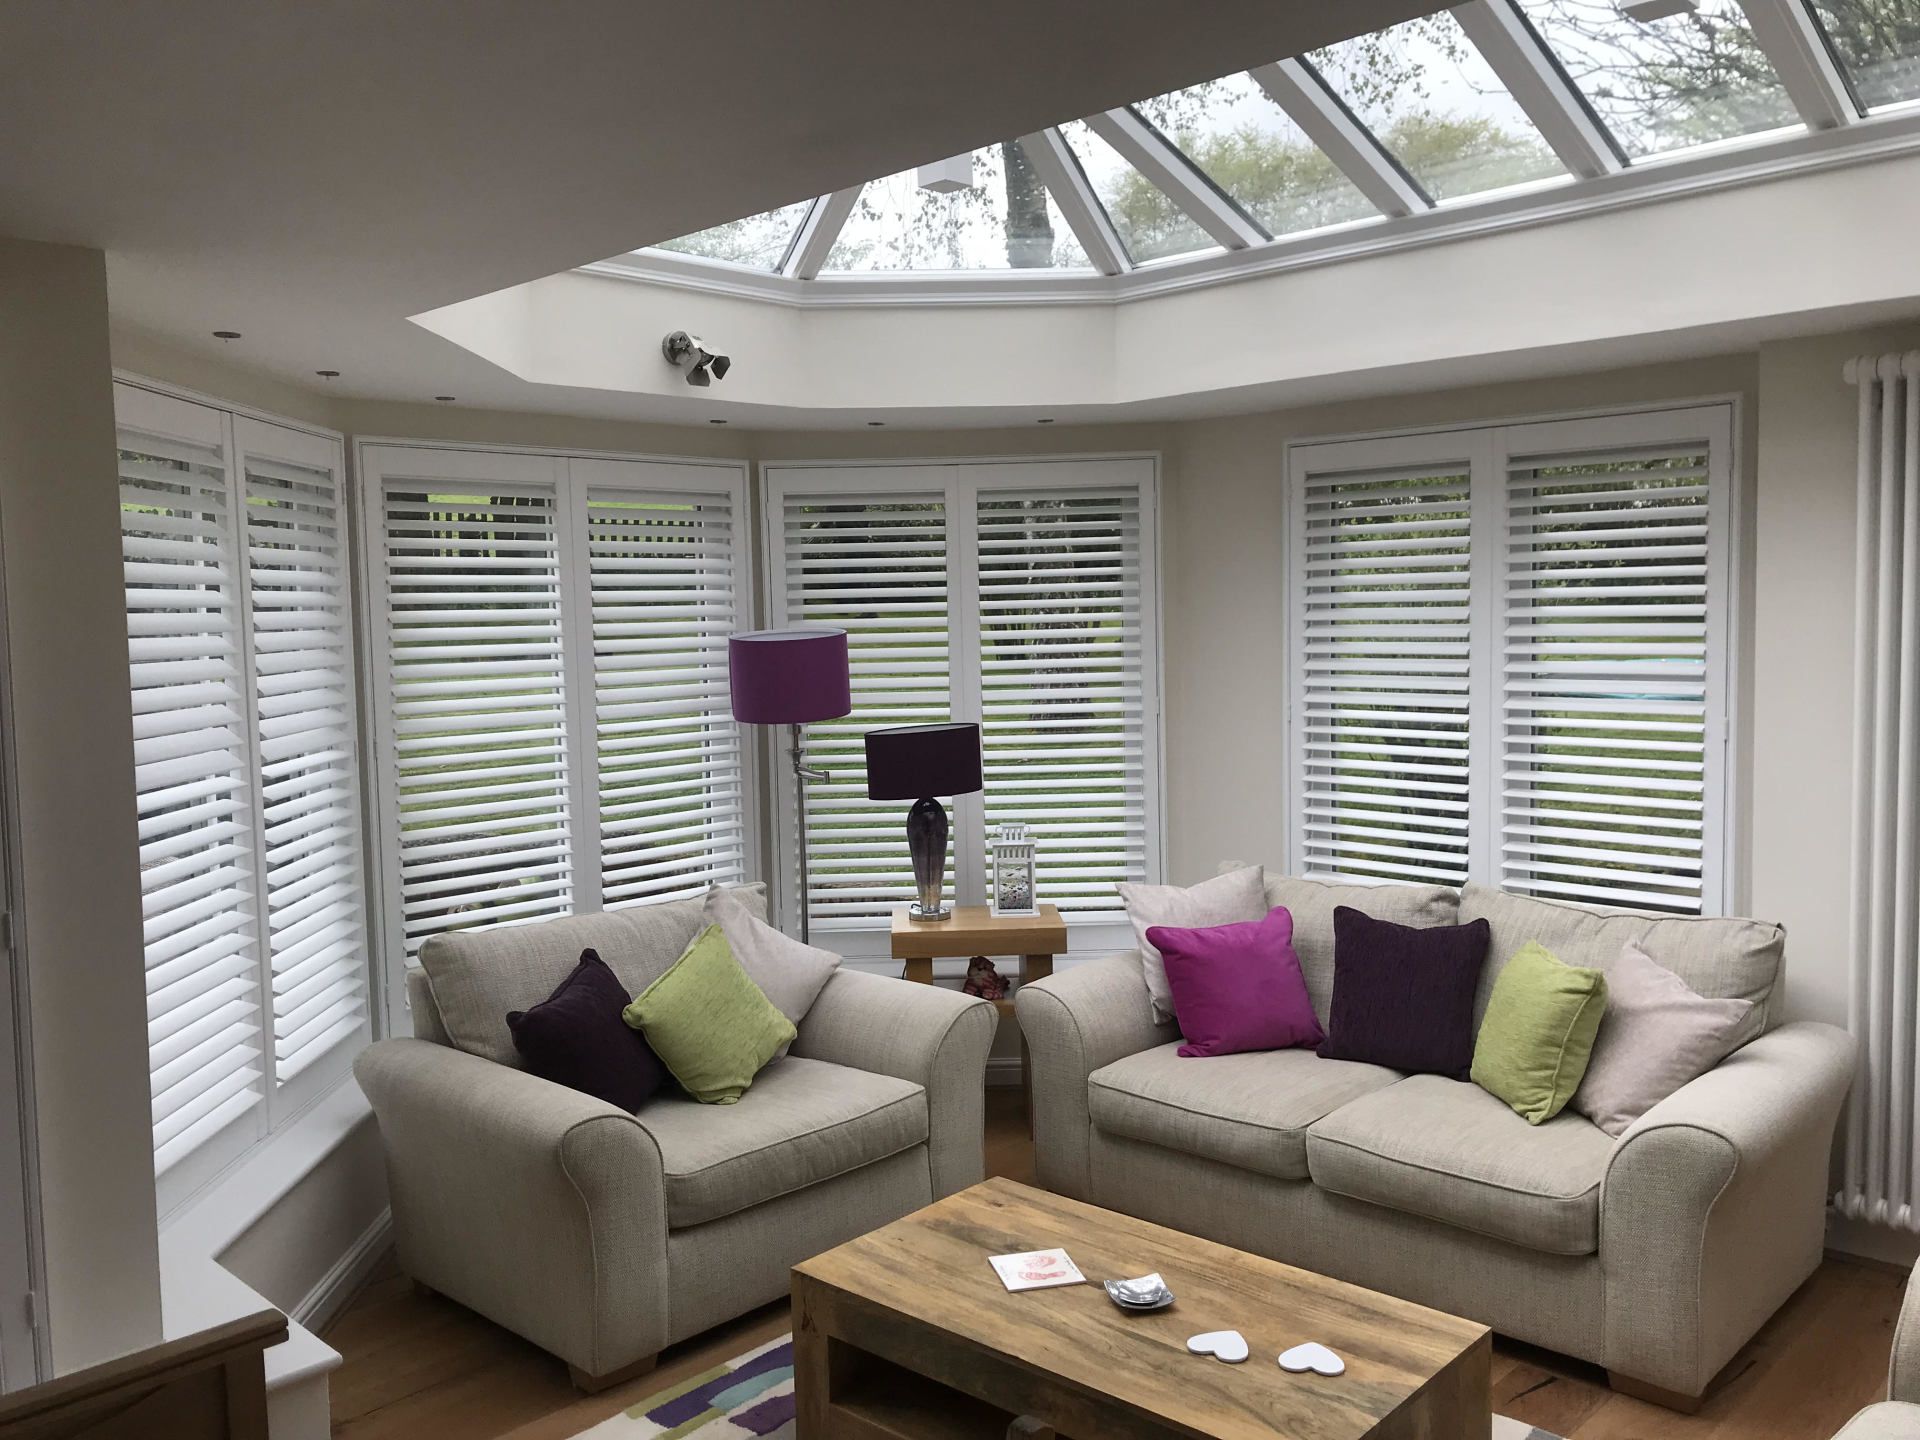 British Made Shutters available to purchase in West Byfleet | Wooden Shutters | Patio Door Shutters |  Made-to-Measure Shutters